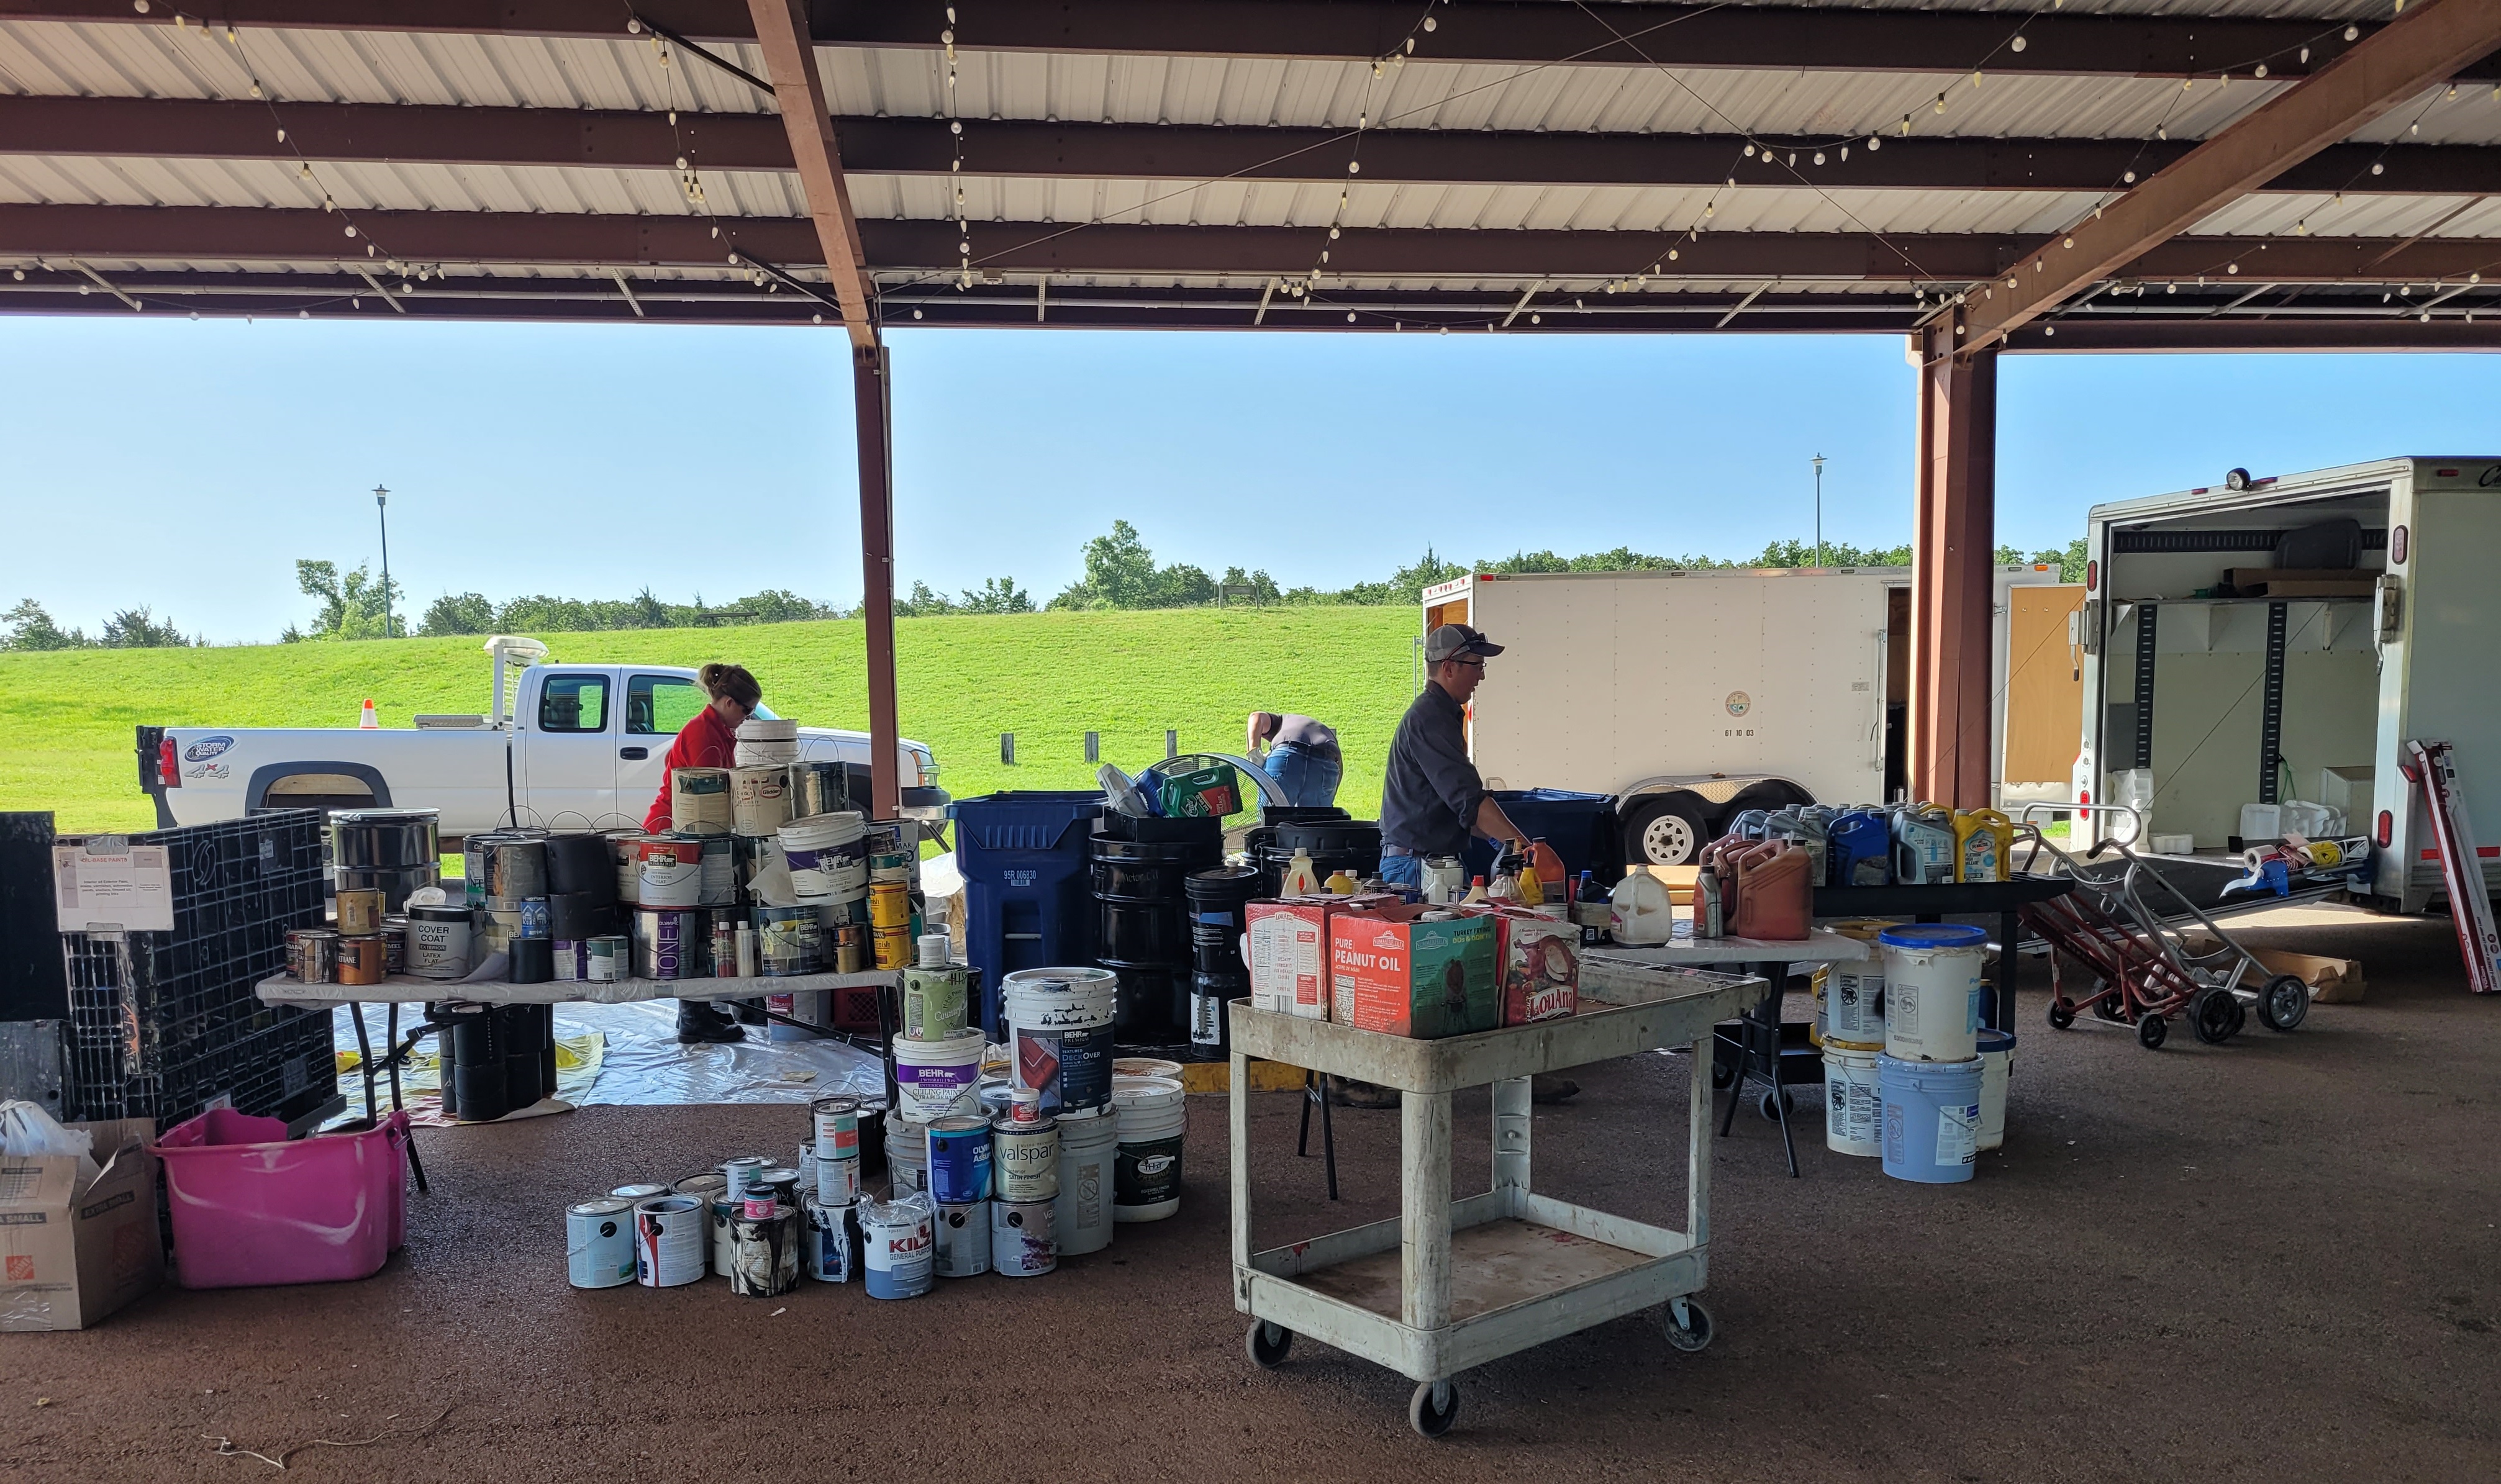 2022 mobile collection event of household hazardous waste